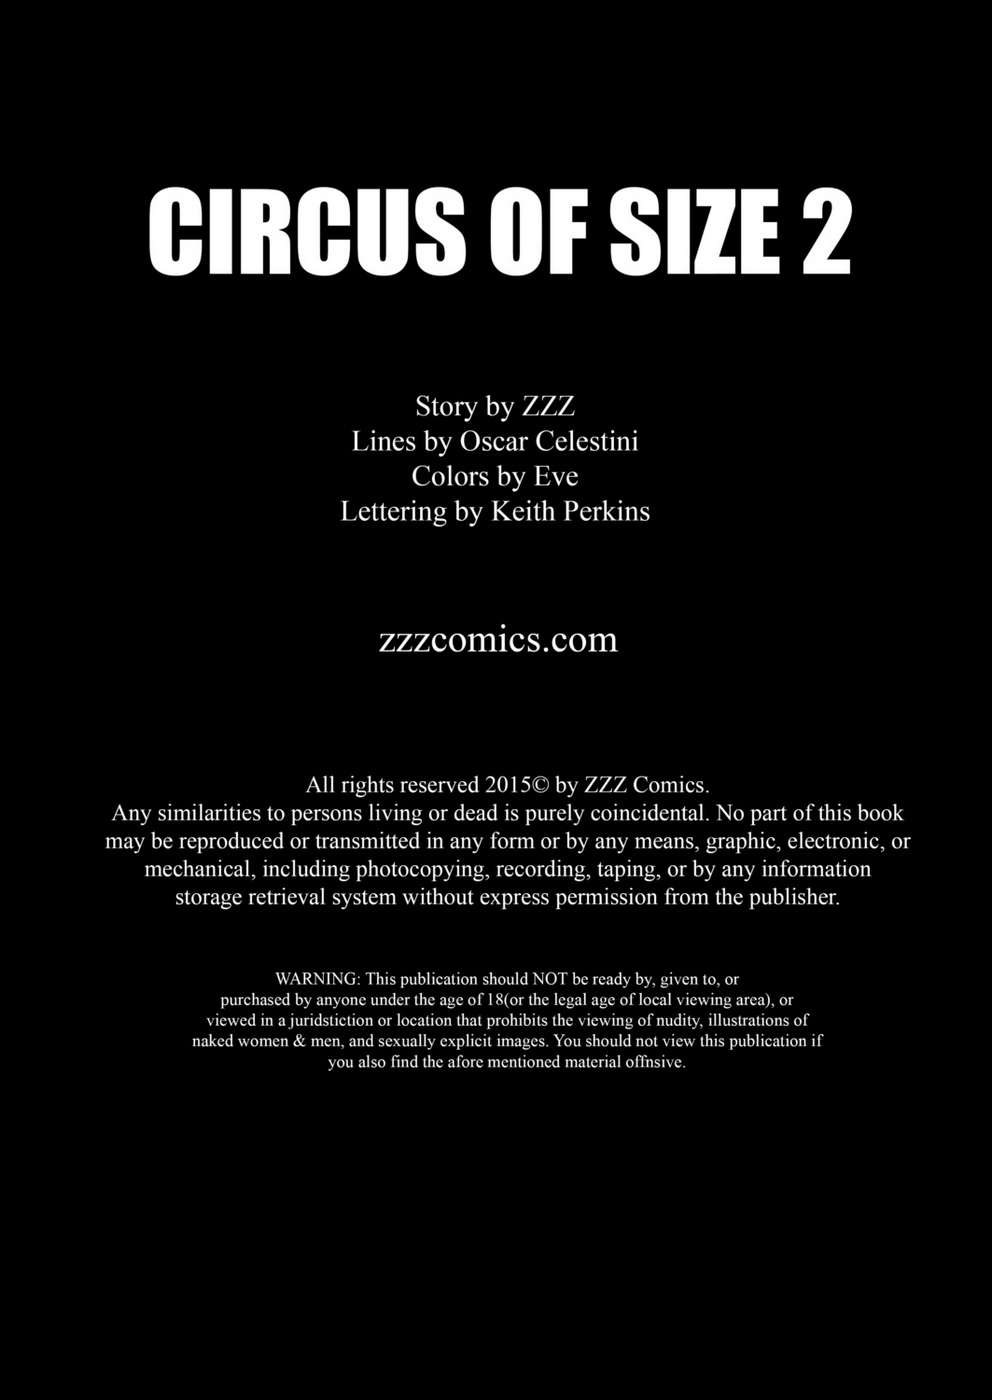 ZZZ-Circus of Size 2